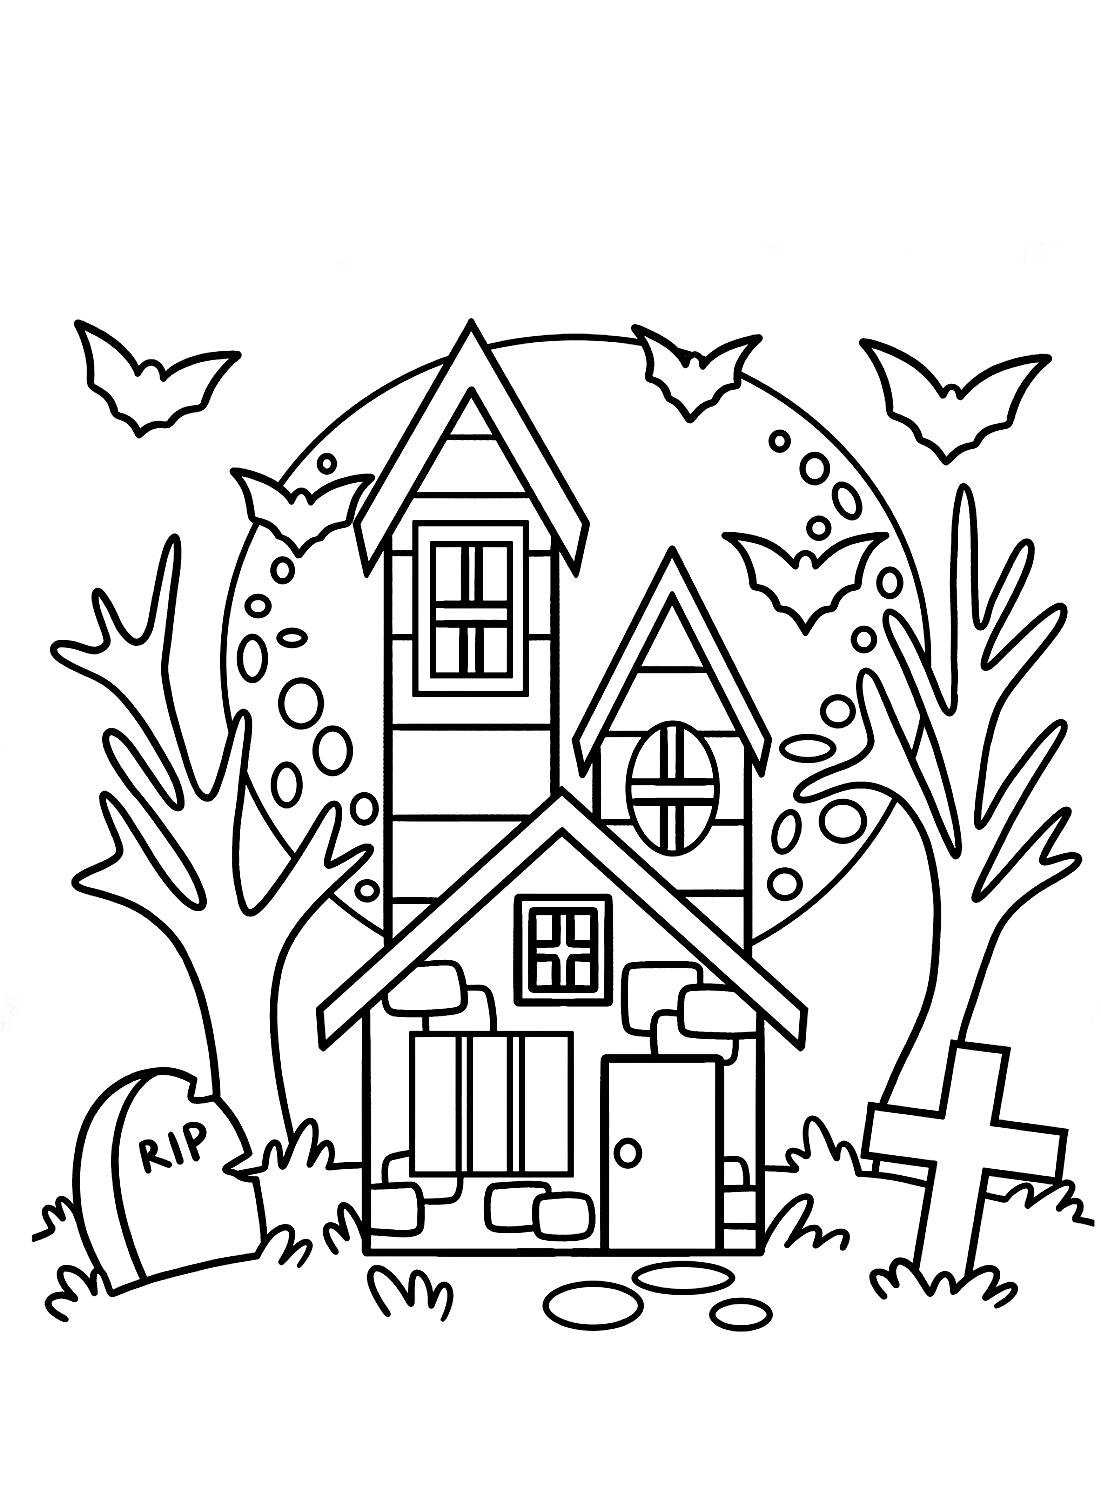 Halloween house coloring page from Haunted House